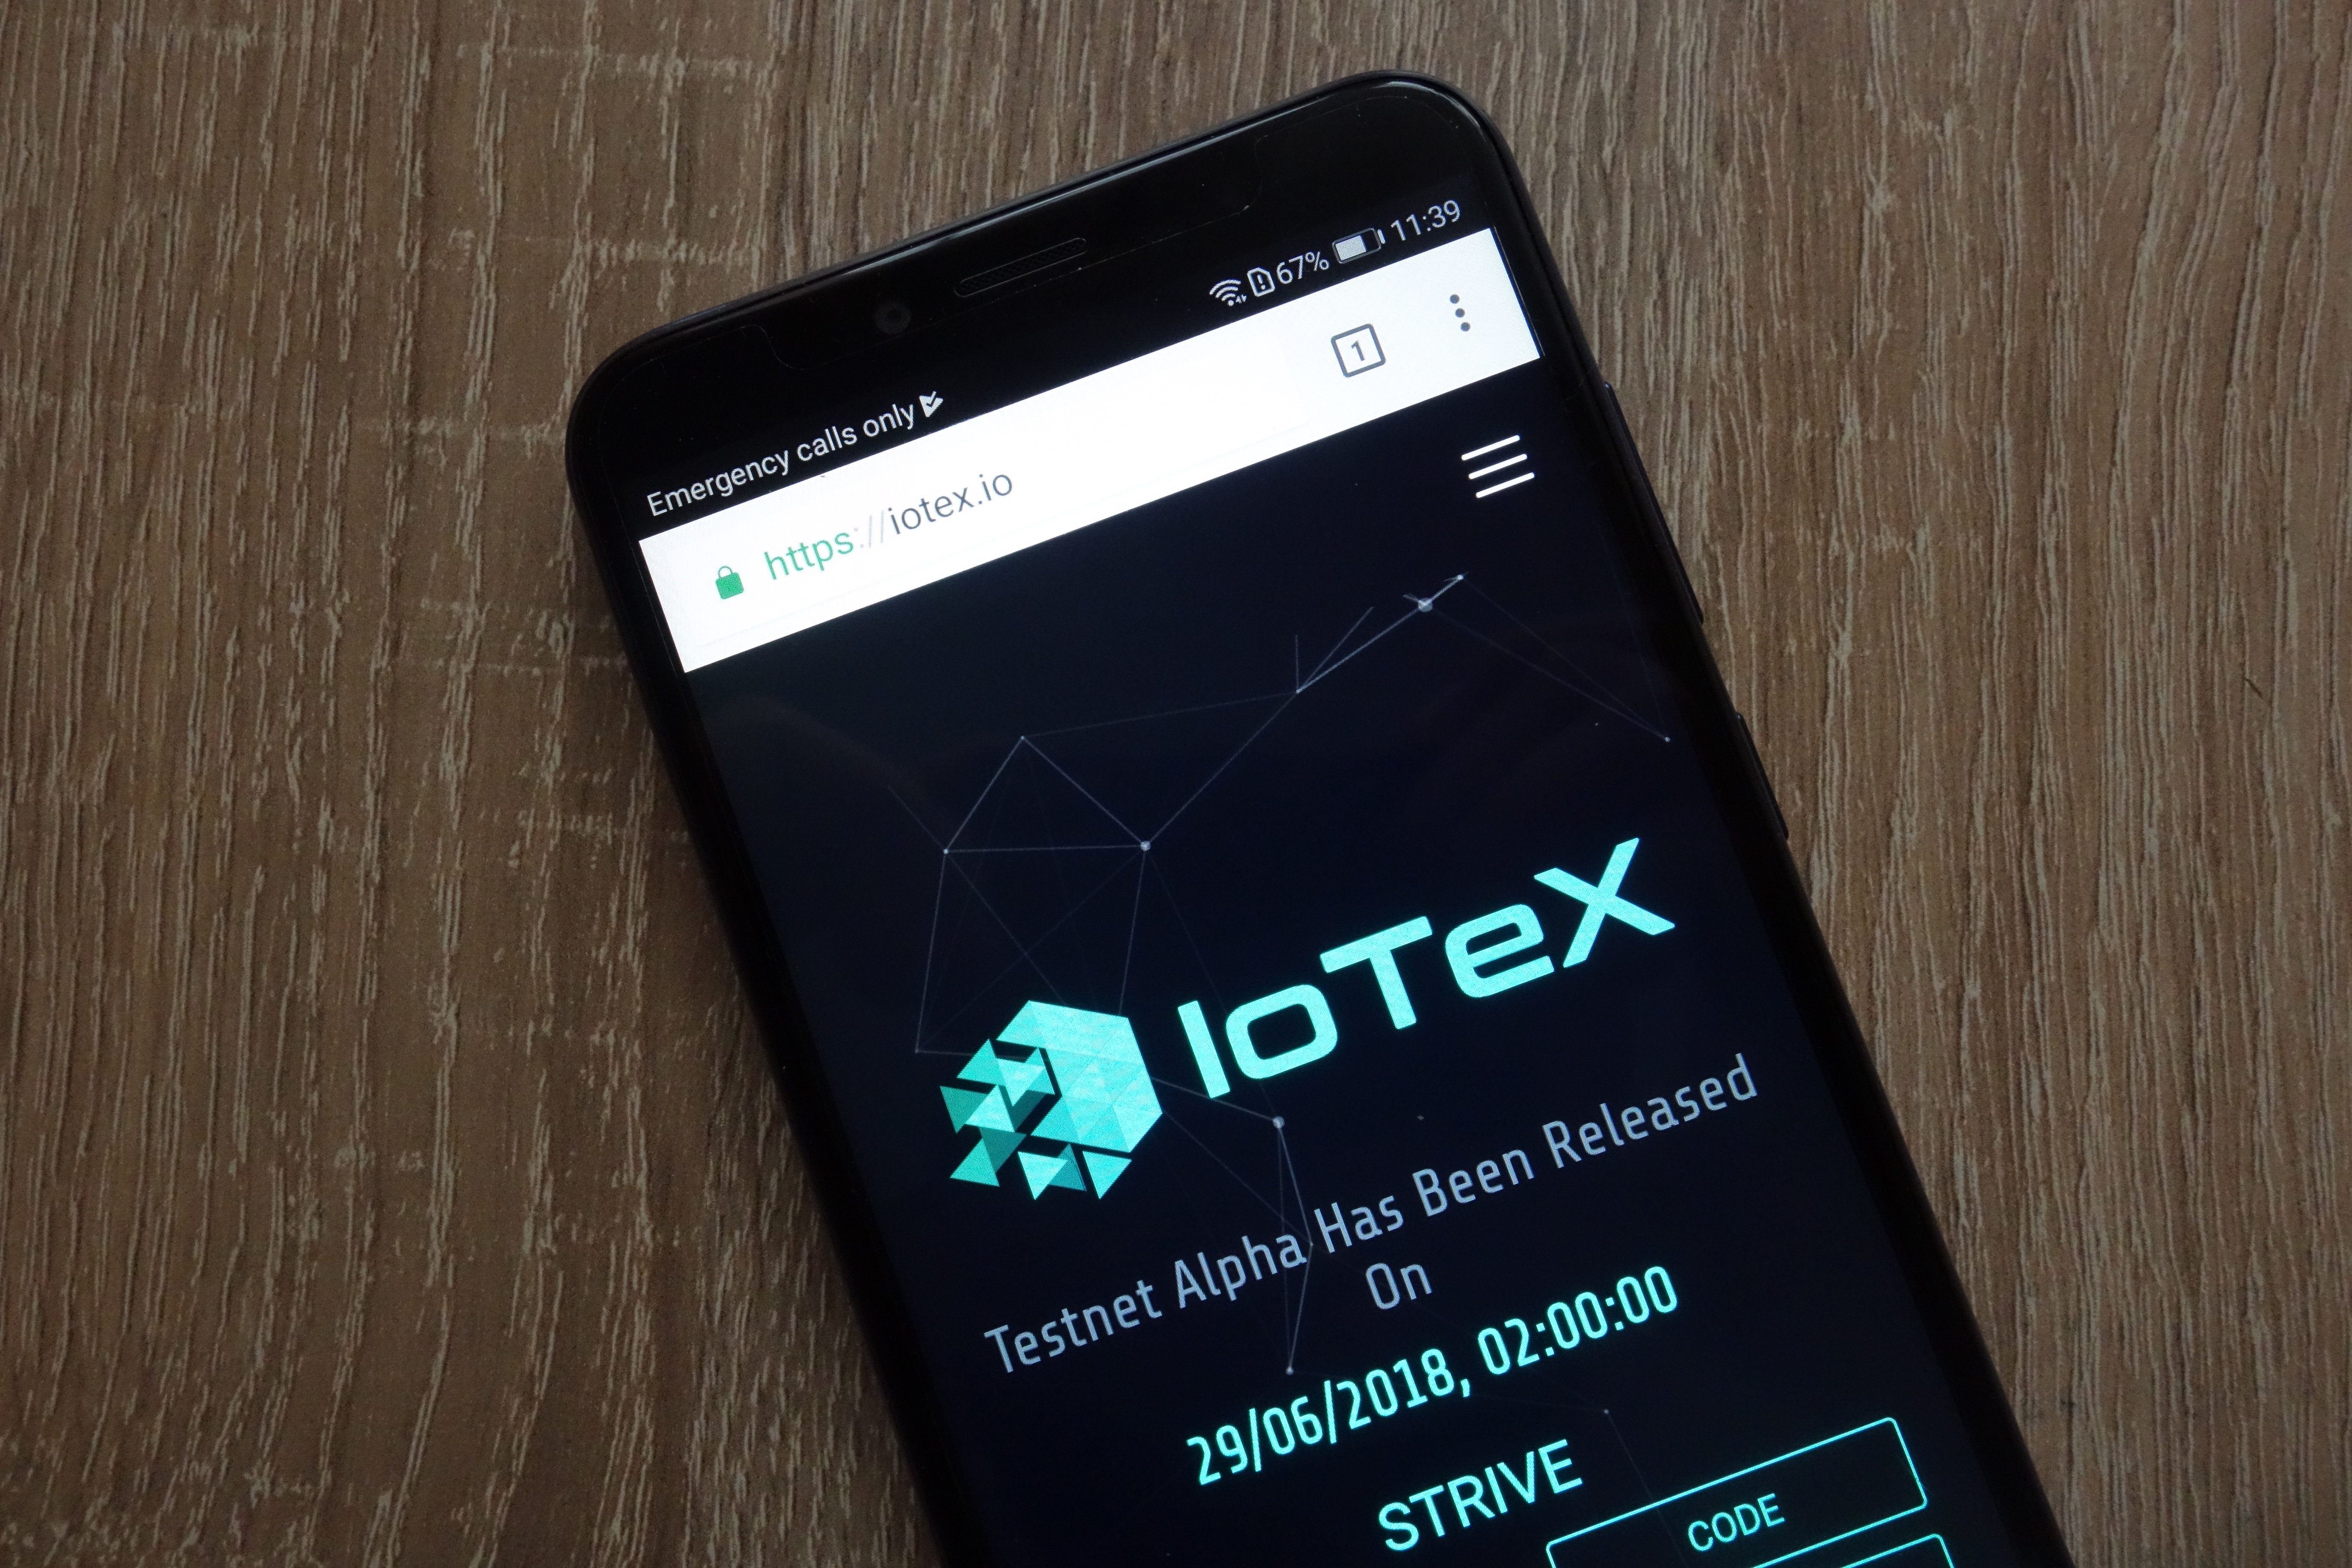  iotex building world best connected places buy 